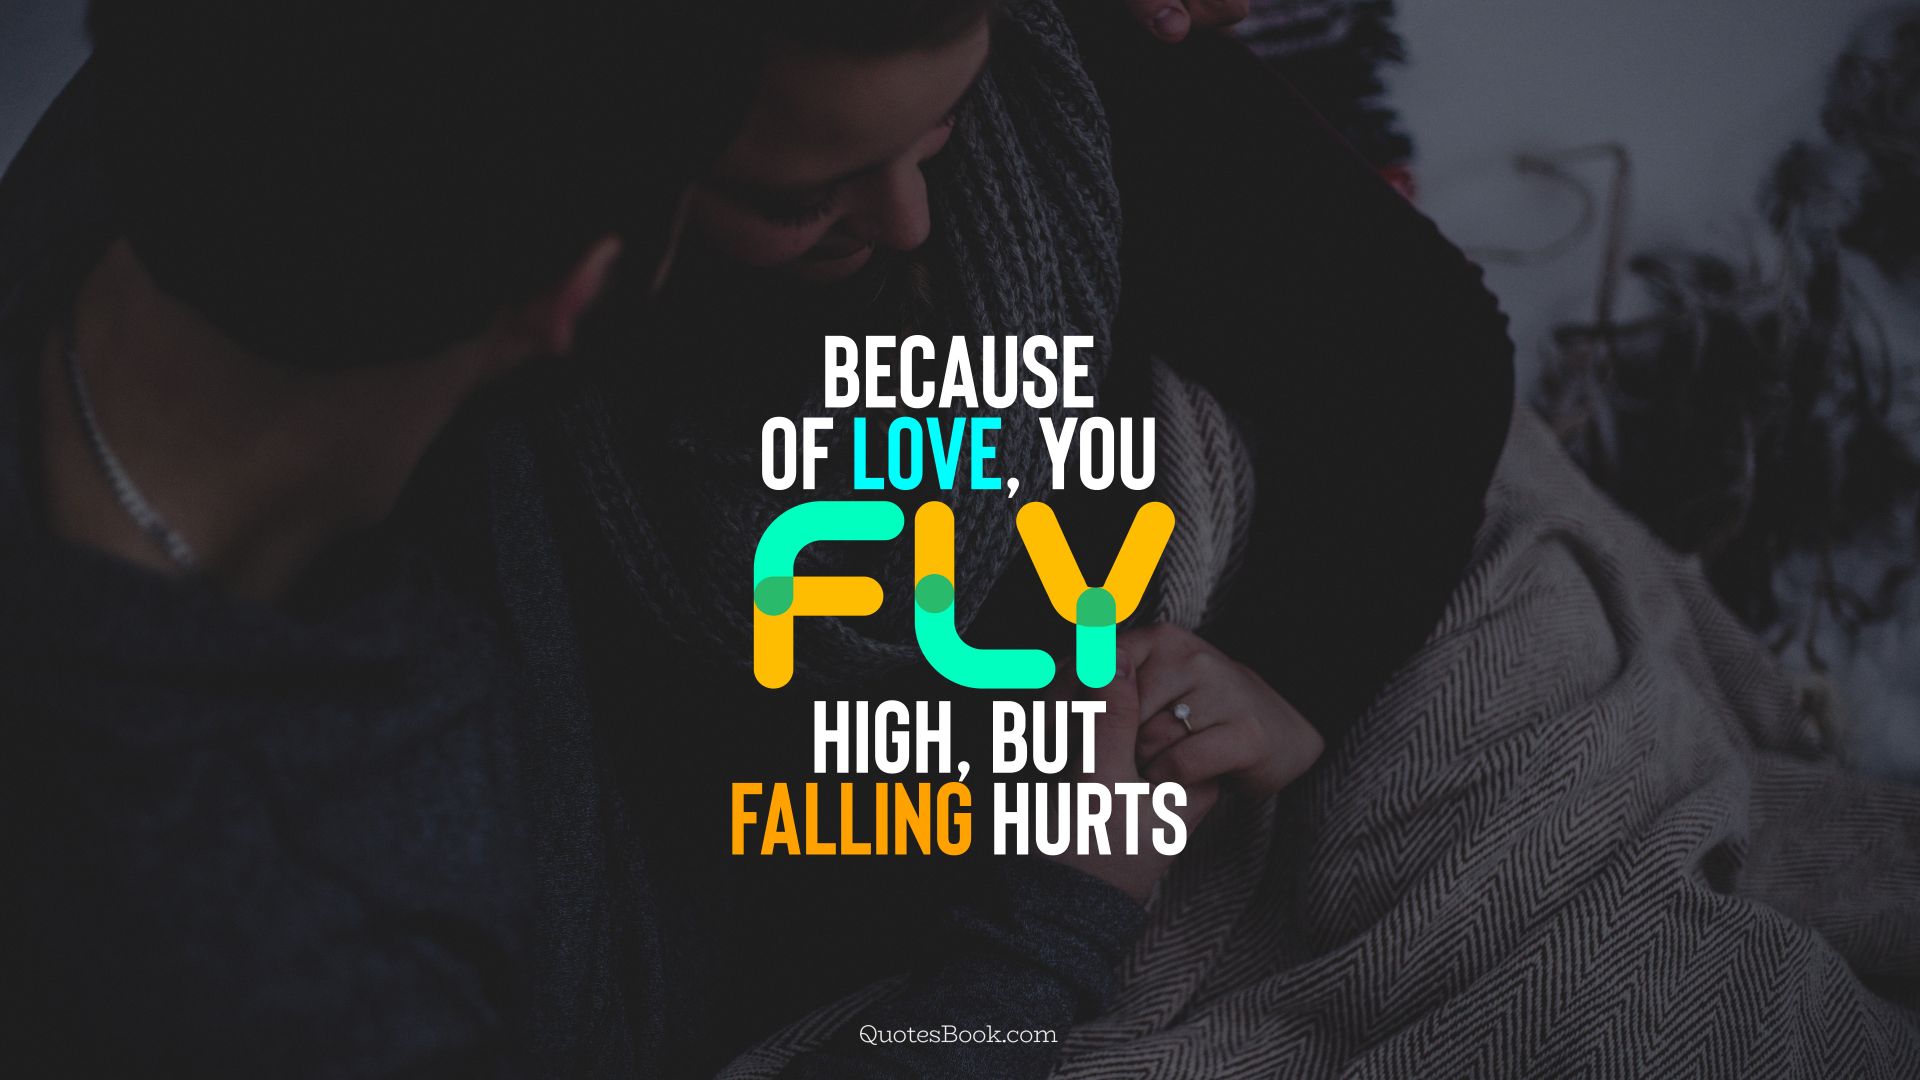 Because of love, you fly high, but falling hurts. - Quote by QuotesBook